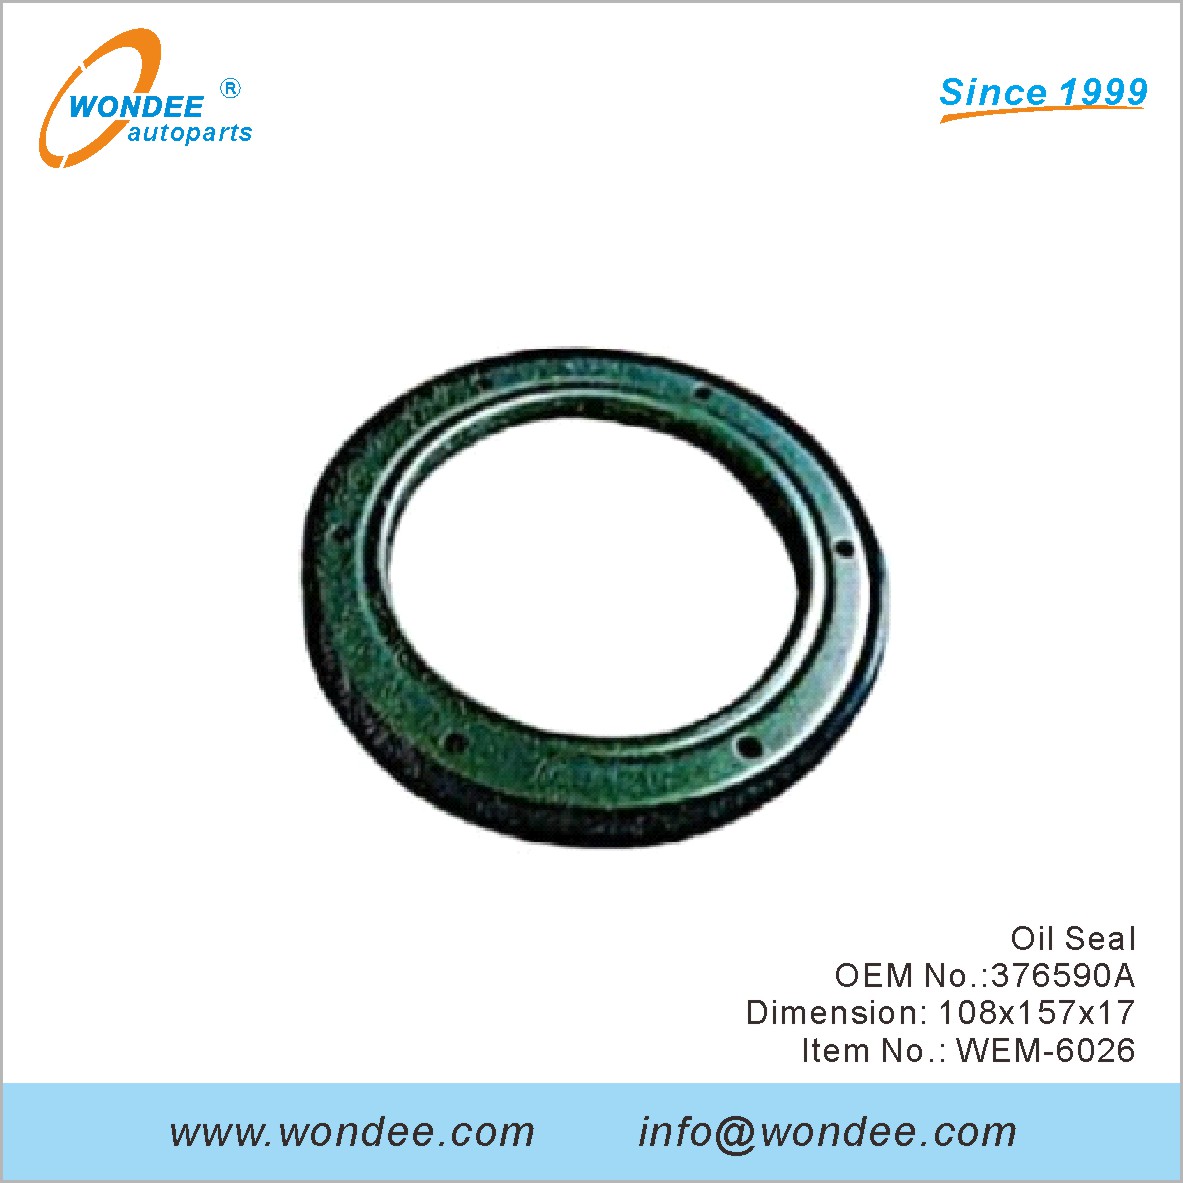 Oil Seal OEM 376590A for engine mouting from WONDEE